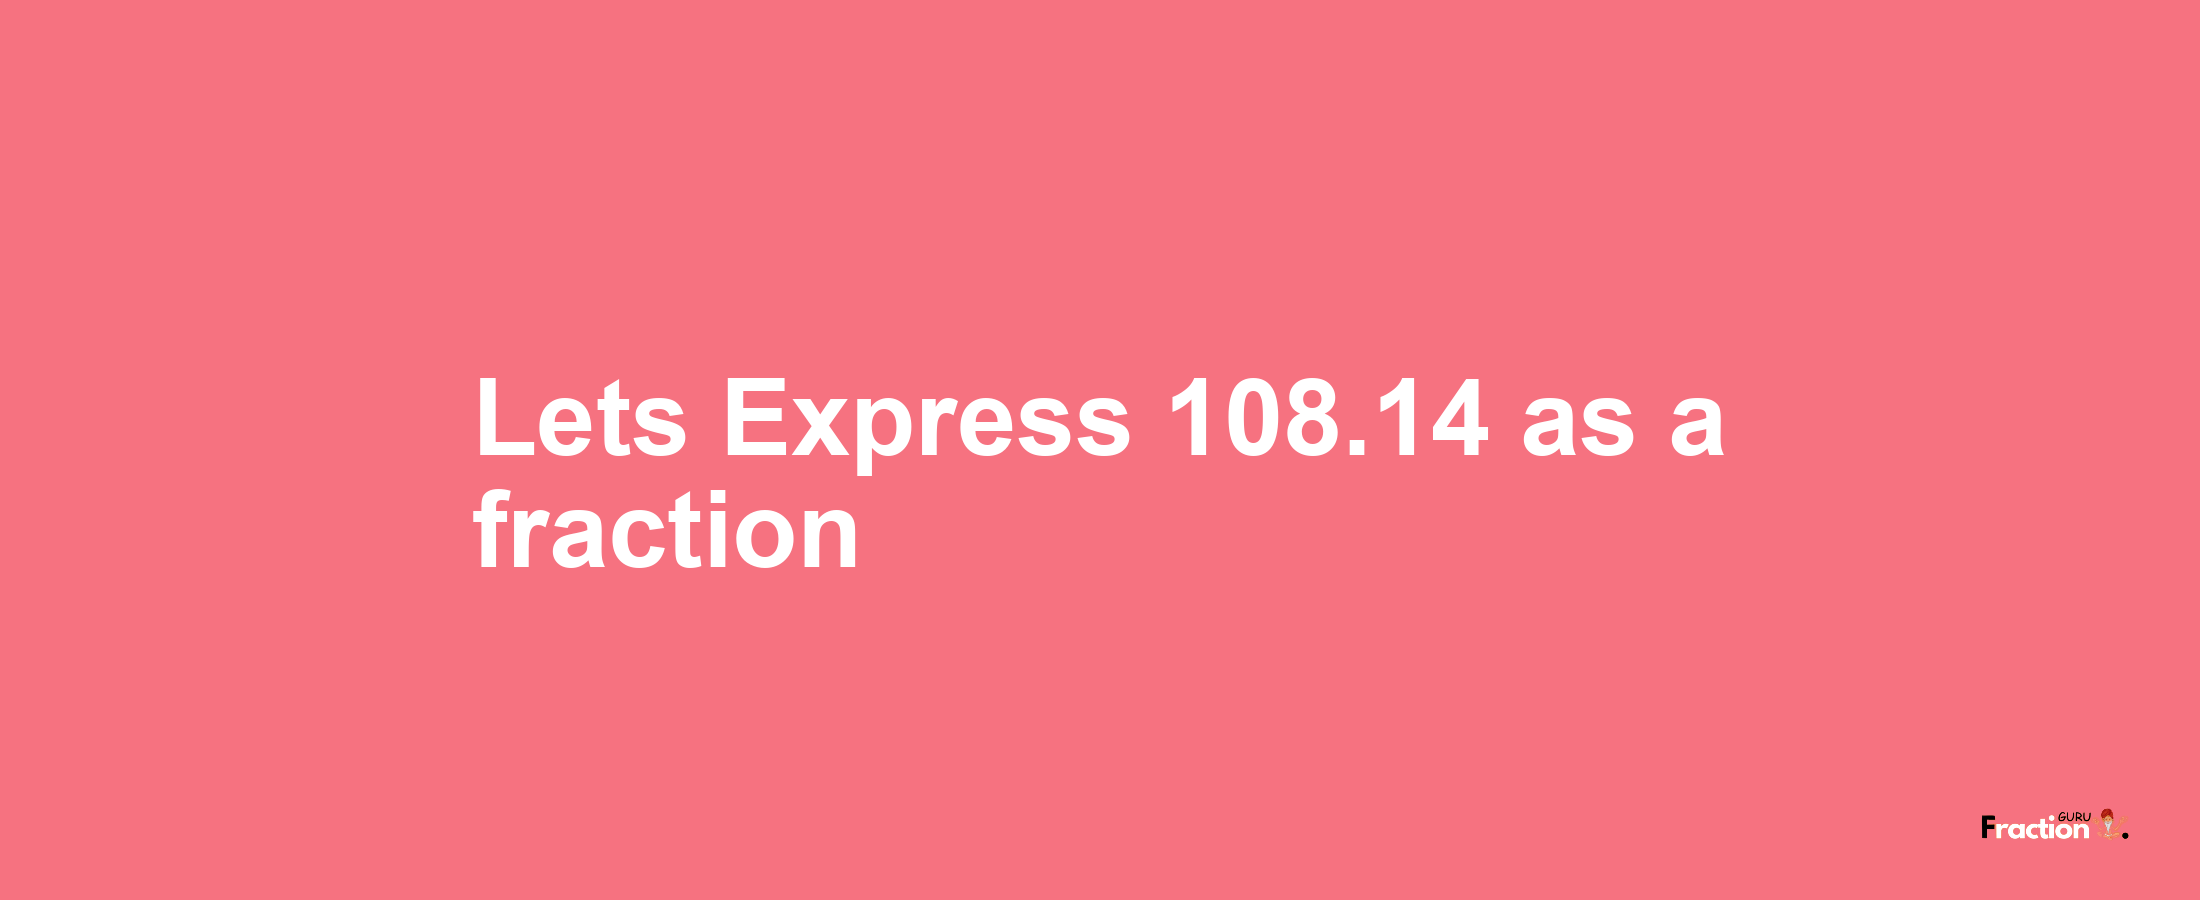 Lets Express 108.14 as afraction